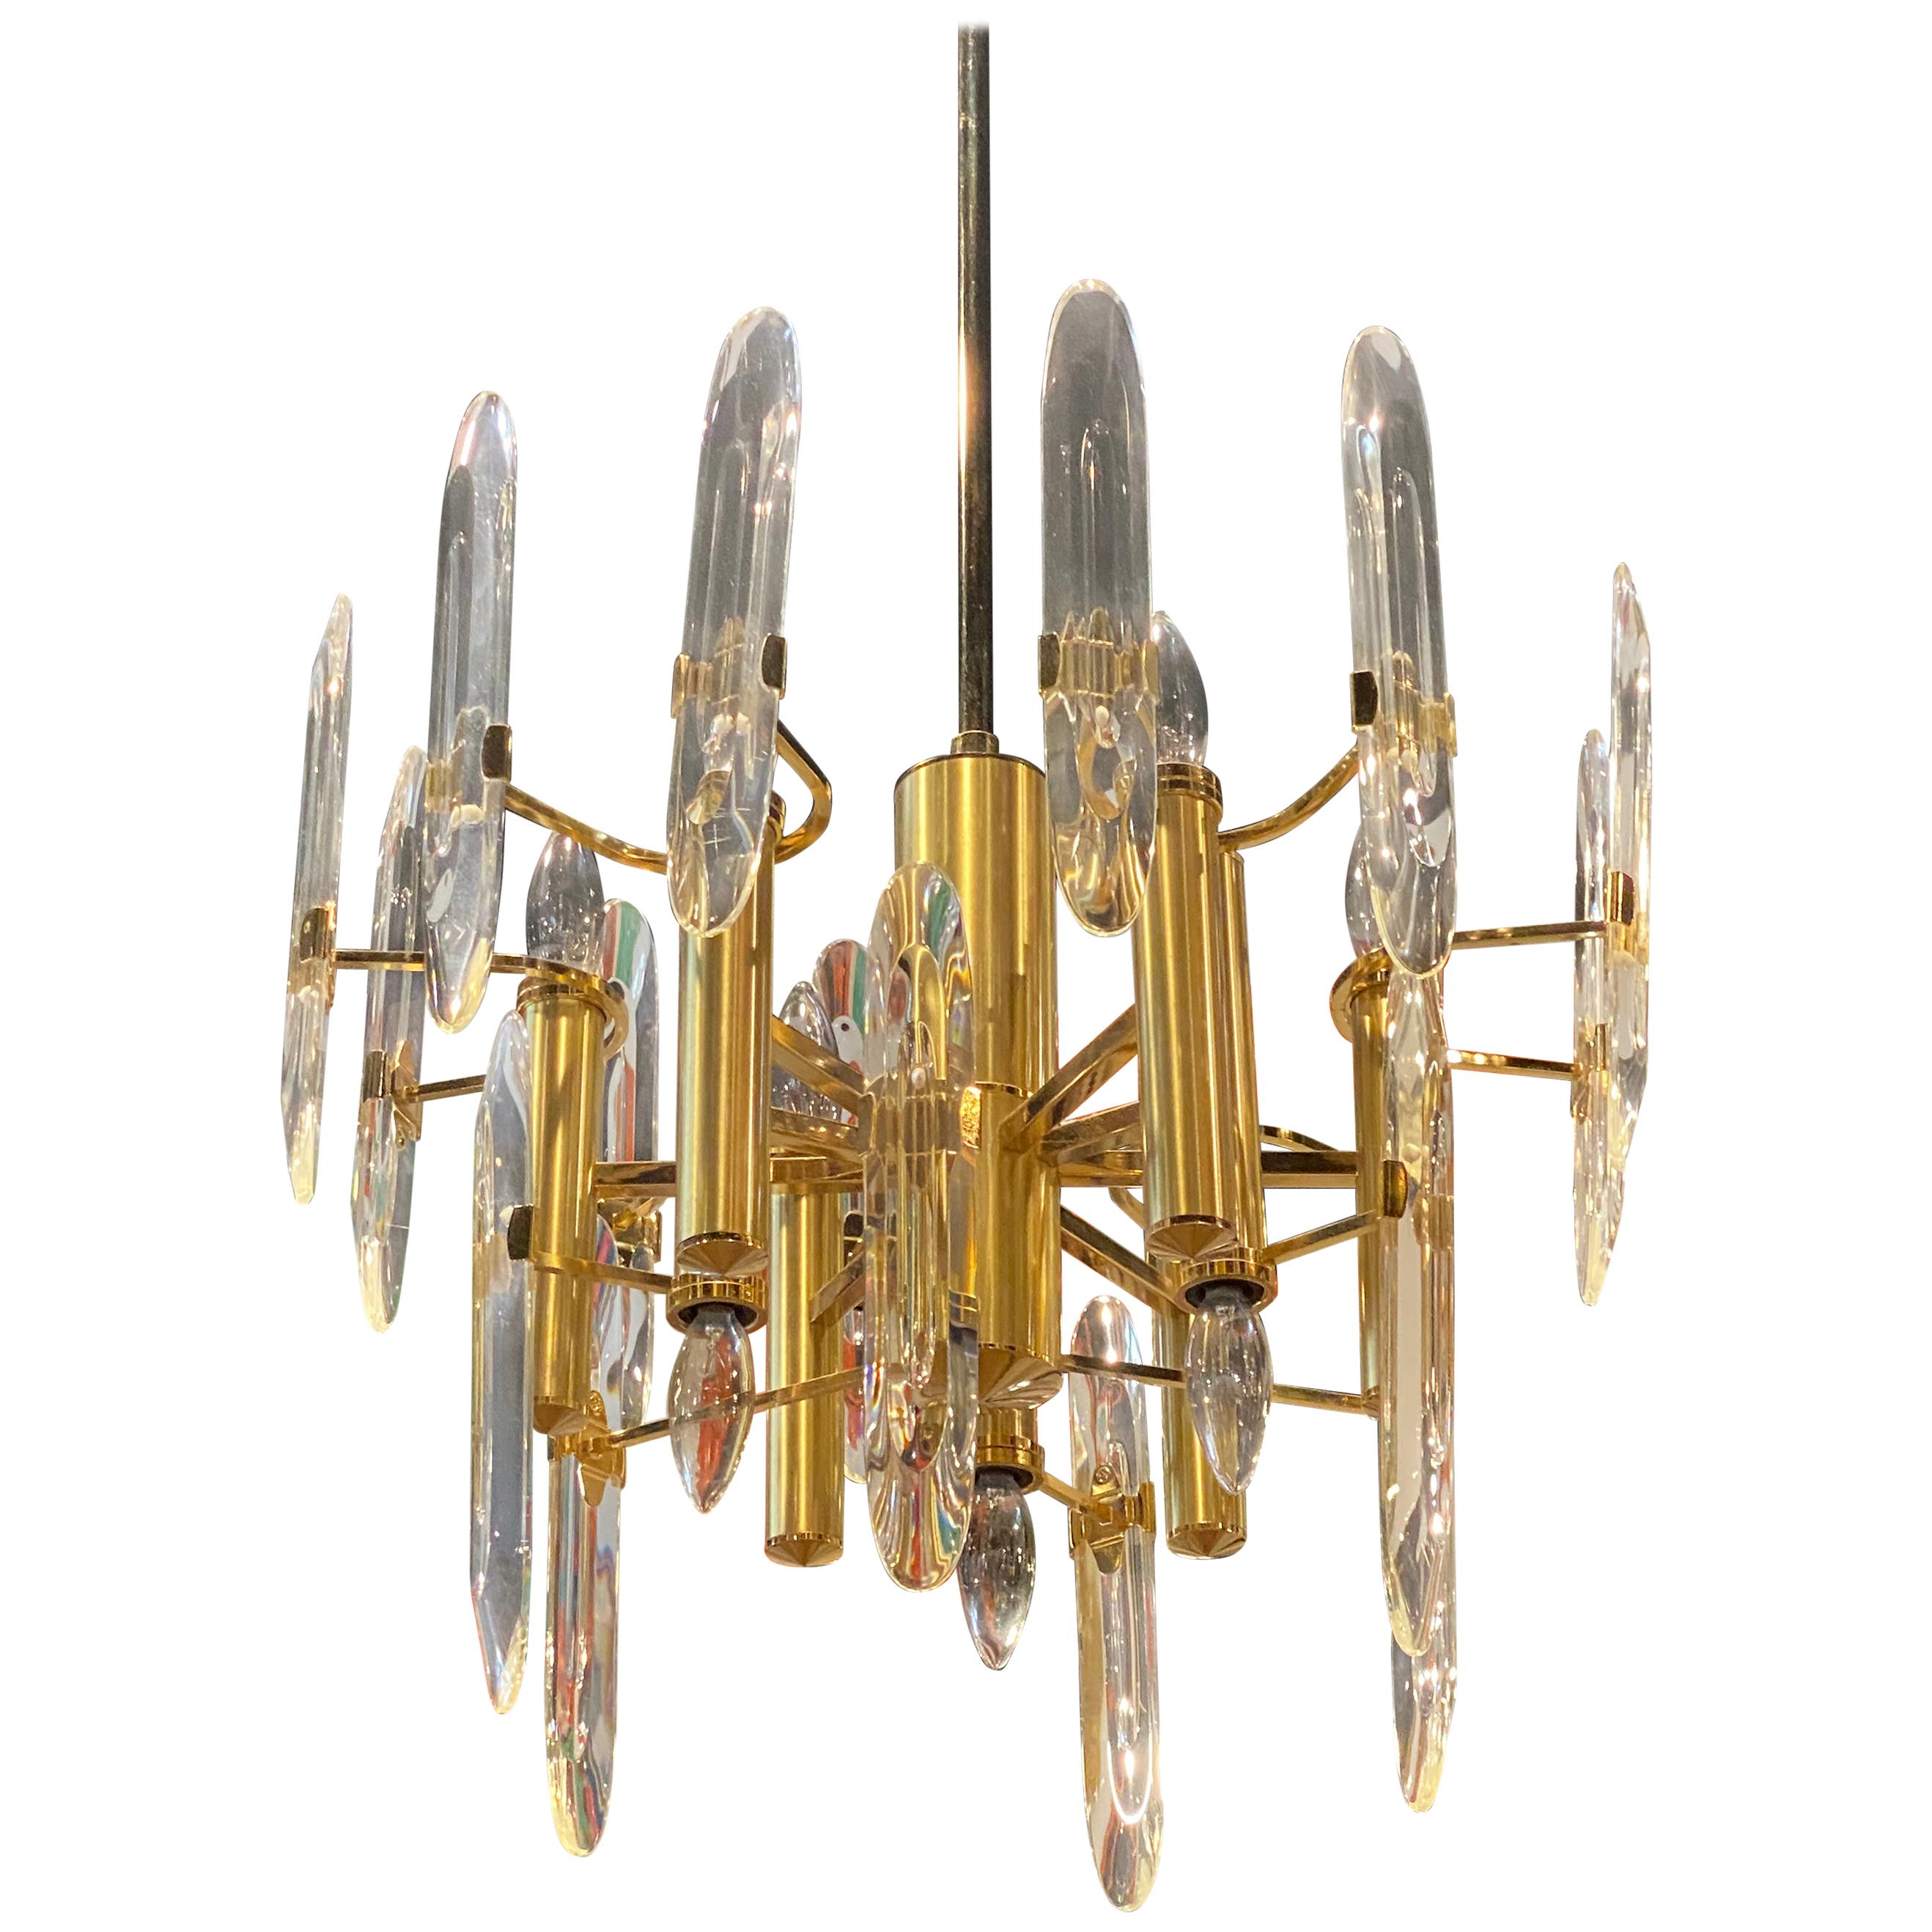 Vintage Hollywood Regency Sciolari Brass and Glass Chandelier Pair Available For Sale